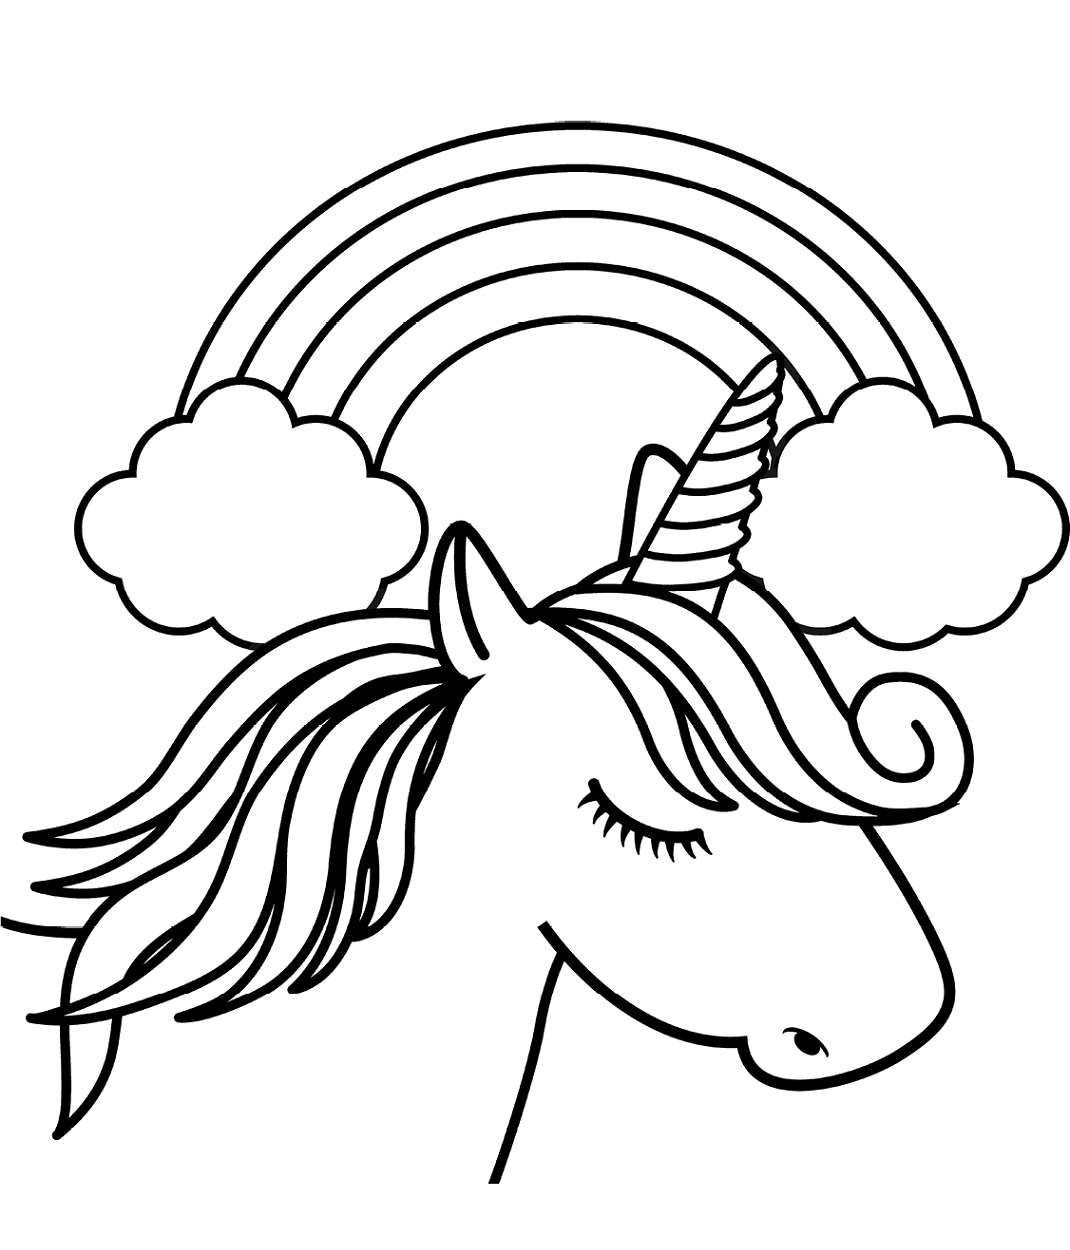 Download Unicorn Head In Front Of Rainbow Coloring Page - Free ...